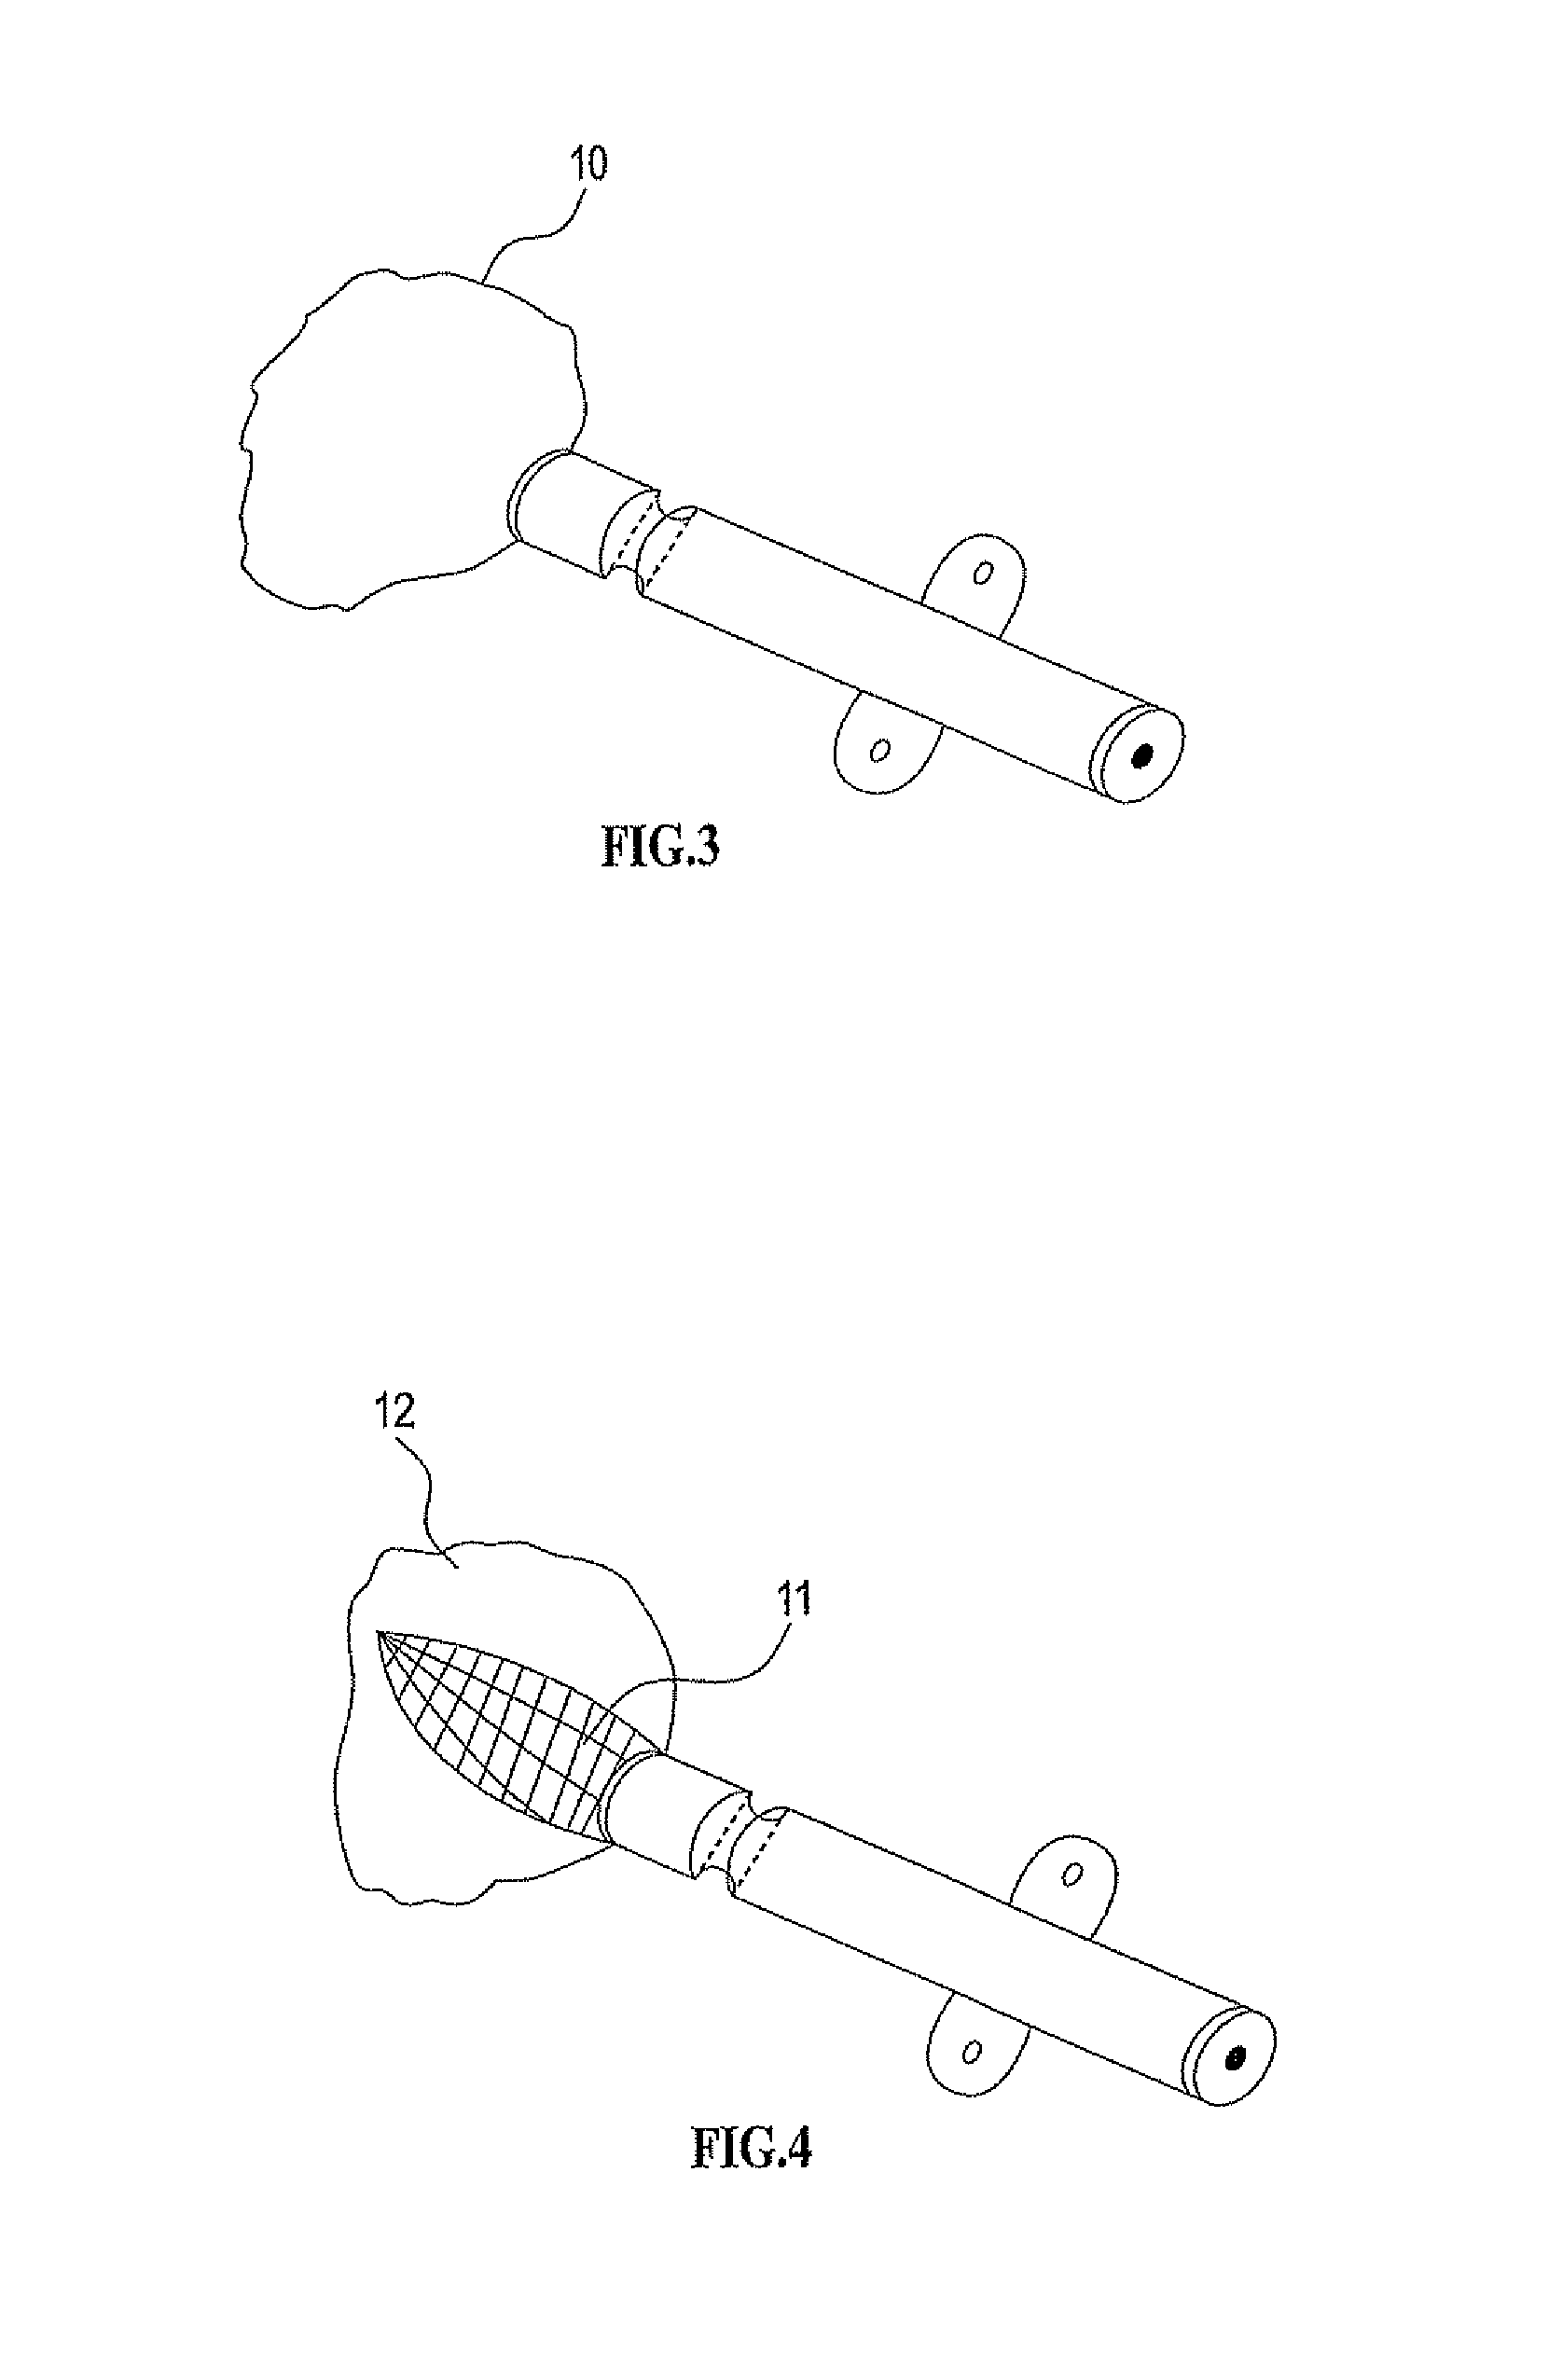 Method for tissue expansion and regeneration using bioresorbable inflatable devices